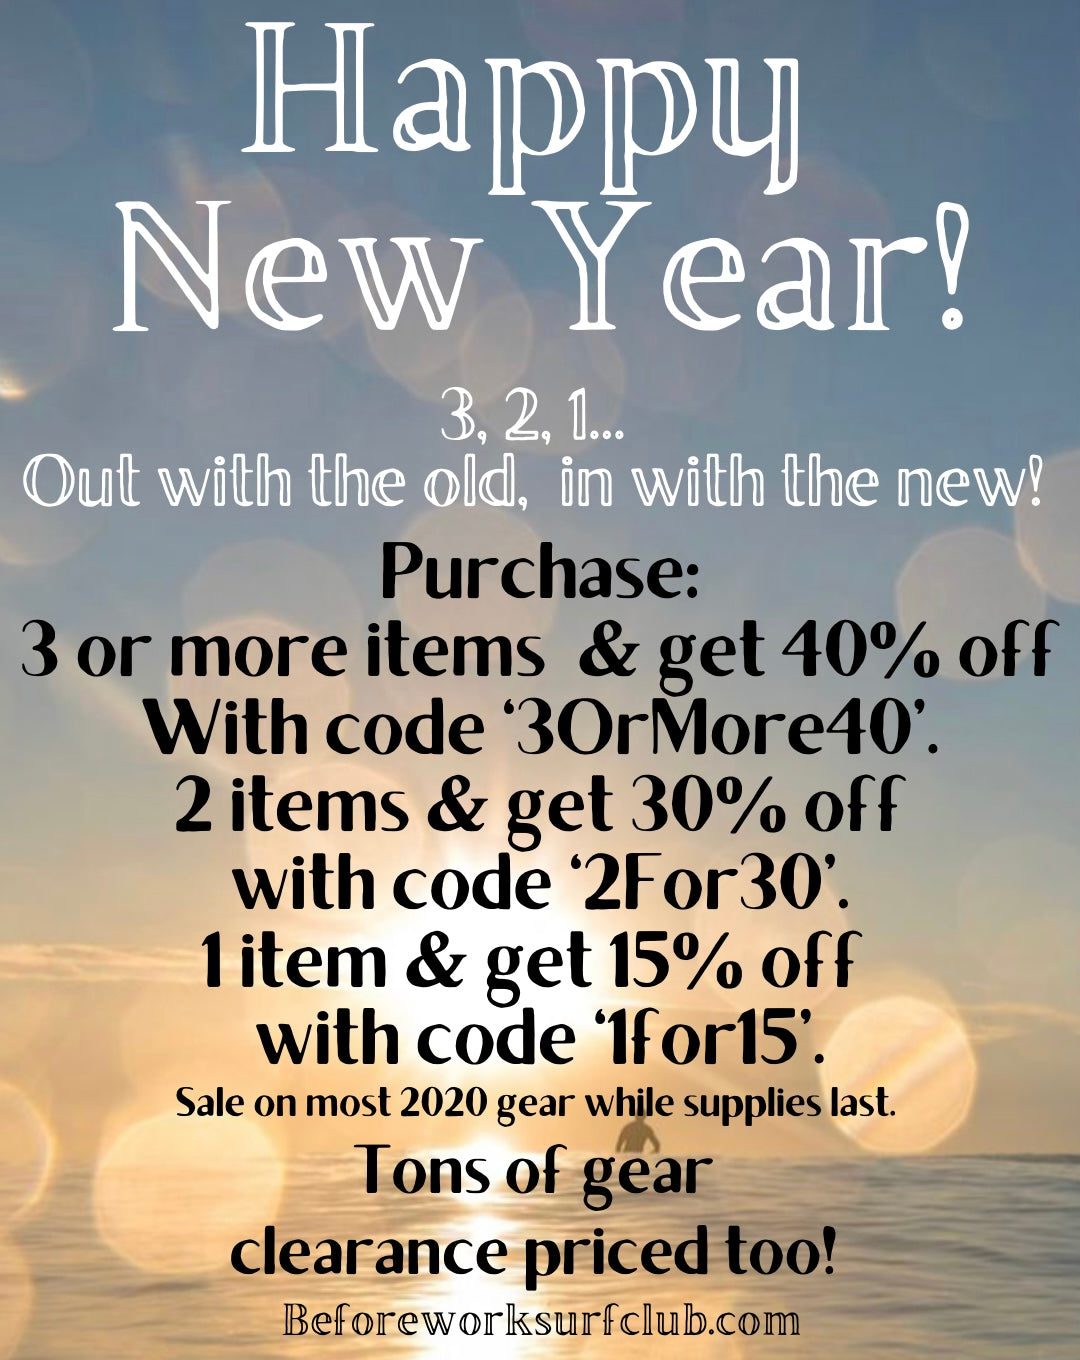 New Year Specials!